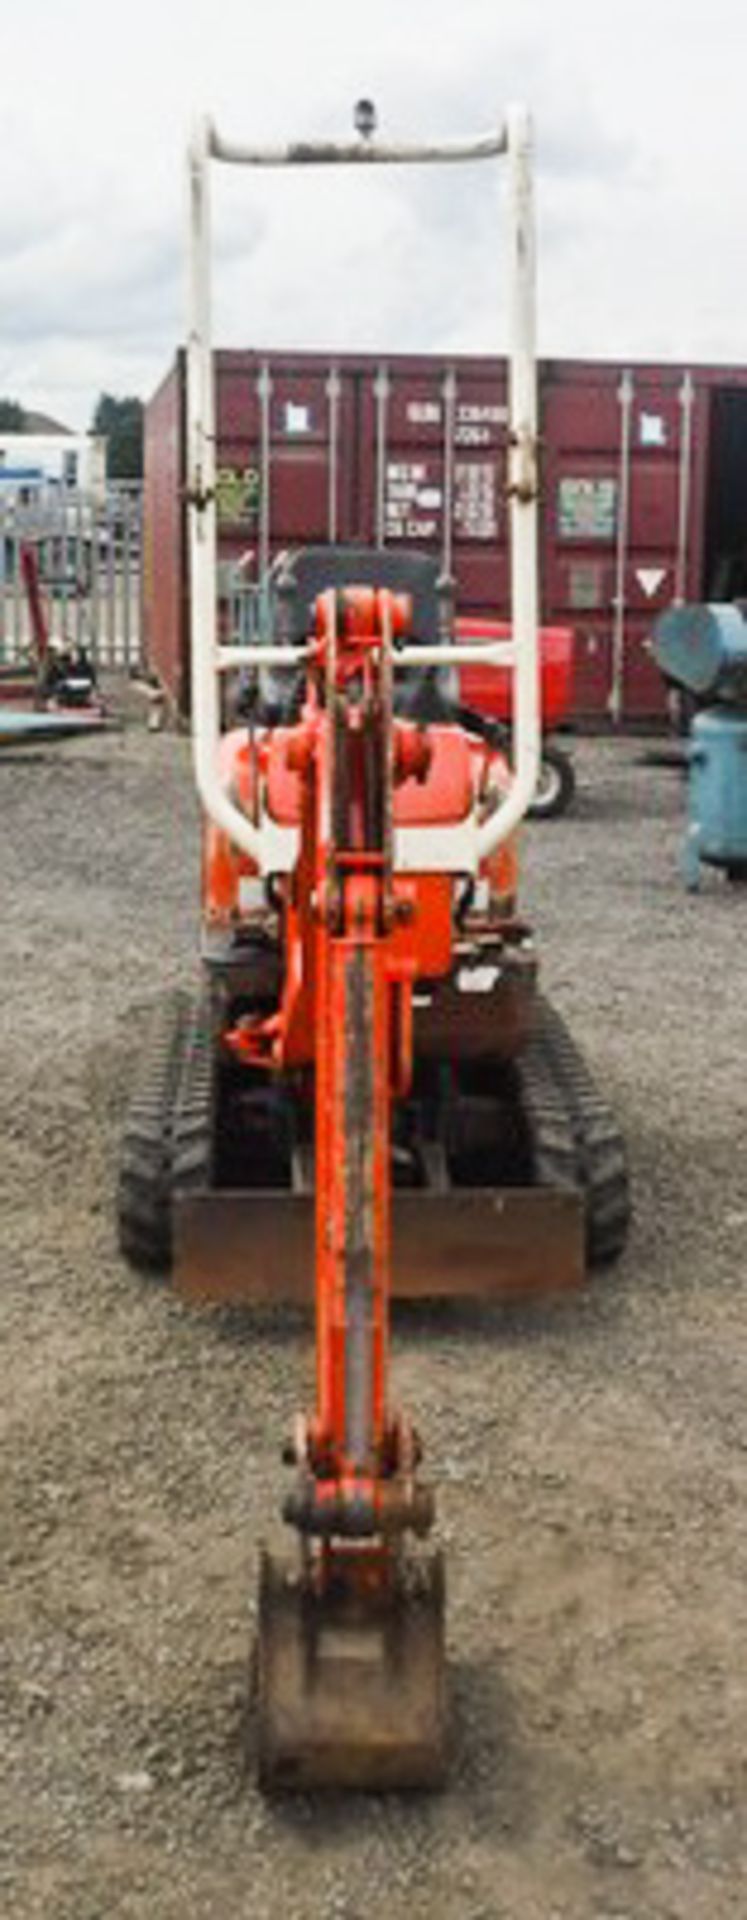 2007 KUBOTA H10-3 MICRO DIGGER, 2622HRS (NOT VERIFIED), 1 BUCKET, 1 TON C/W EXTENDING UNDERCARRIAGE - Image 2 of 19